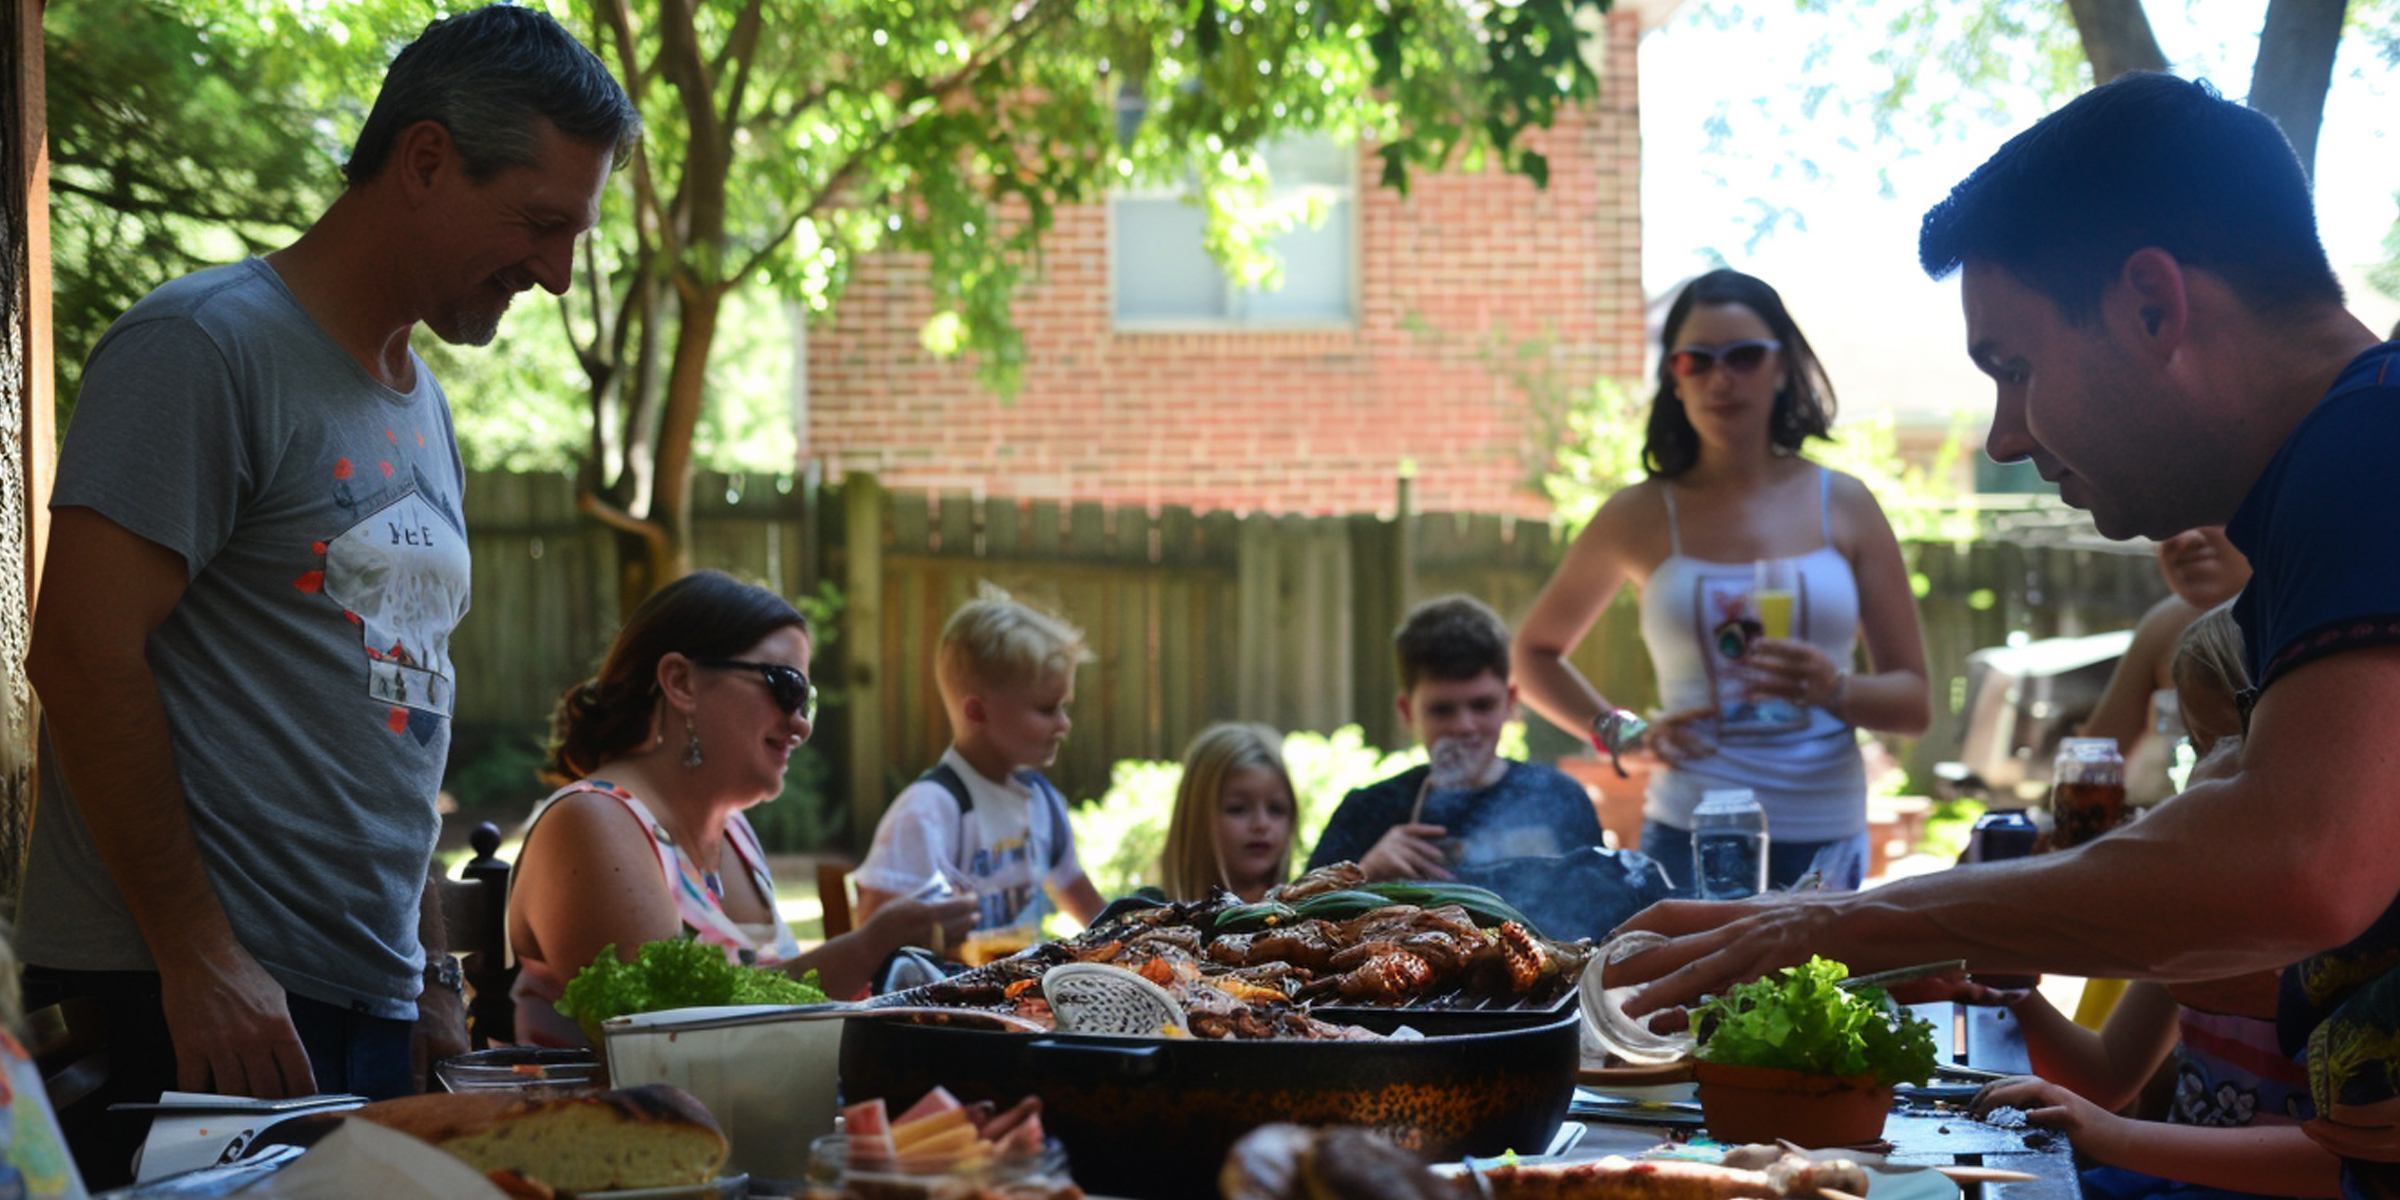 A family enjoying a BBQ party | Source: AmoMama